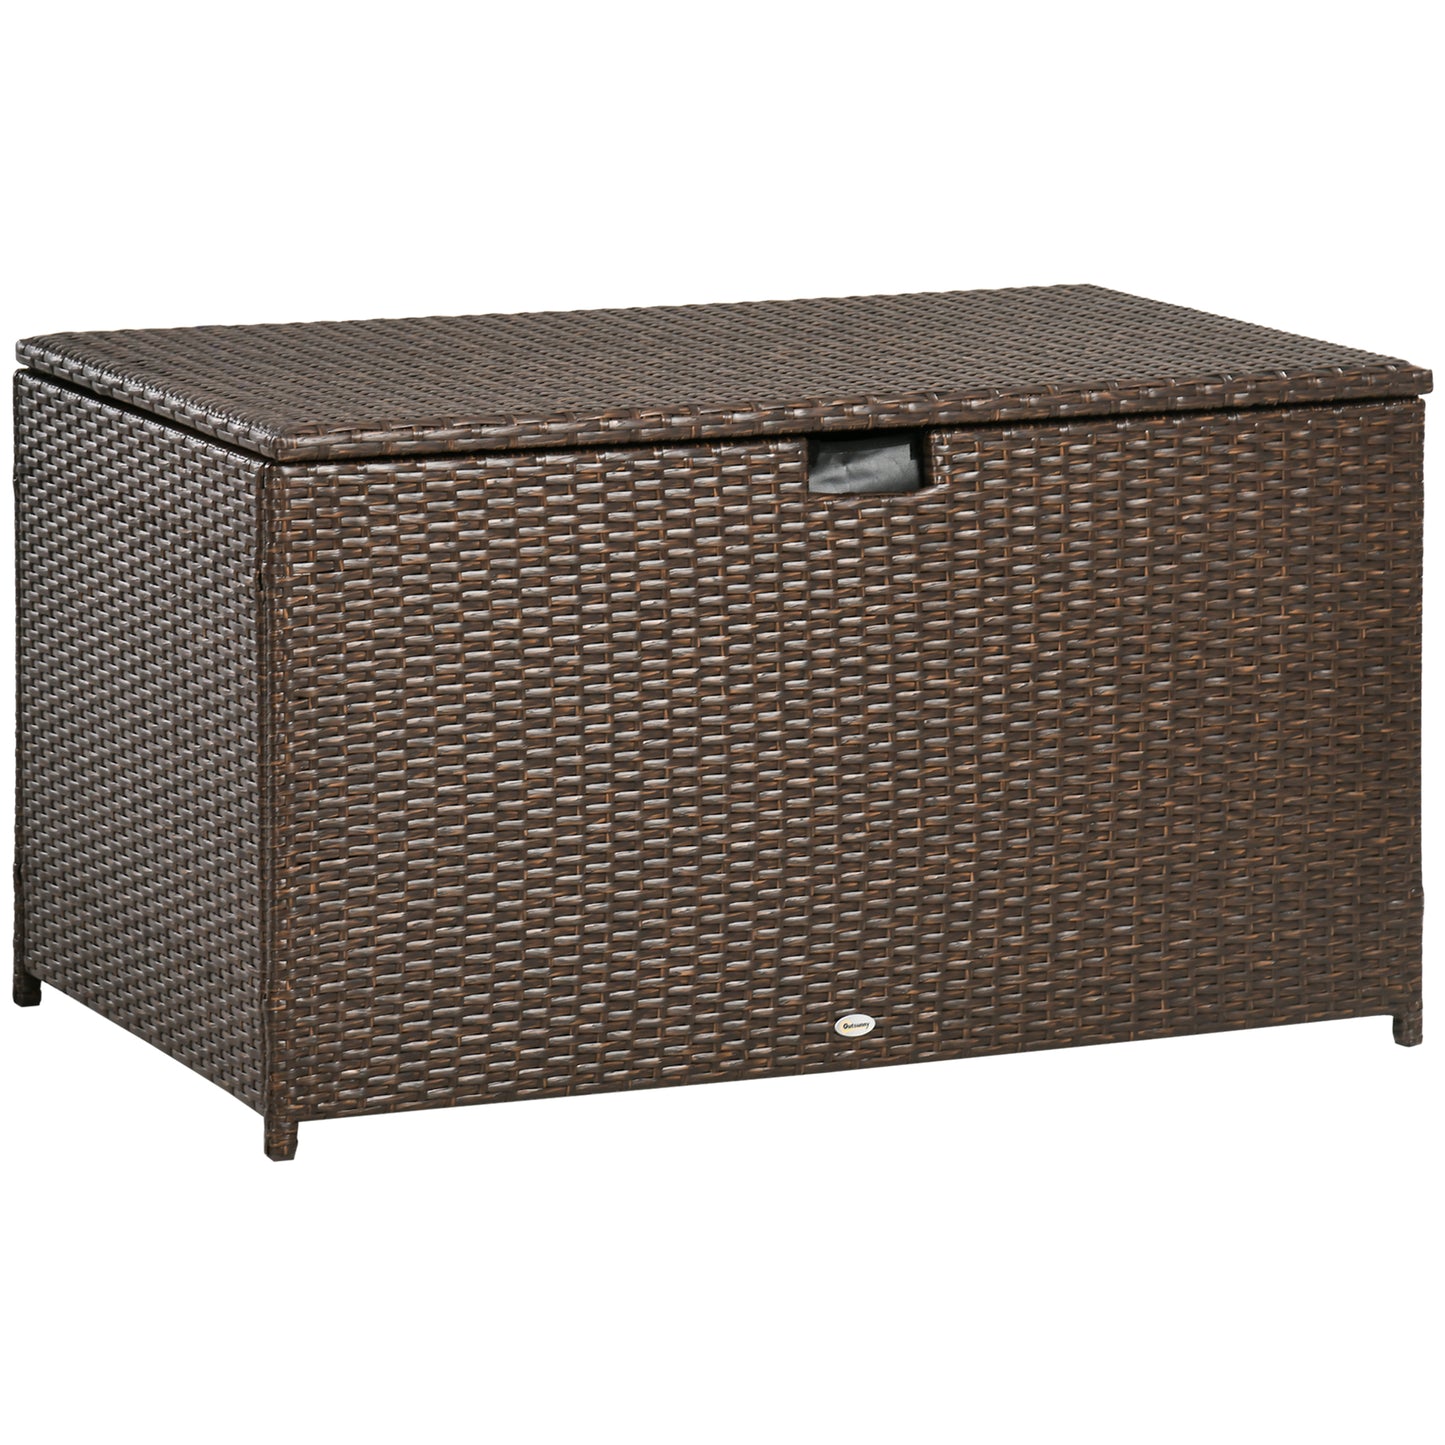 Outsunny 113 Gallon Outdoor Storage Box, Rattan Deck Box for Indoor, Patio Furniture Cushions, Pool Toys, Garden Tools, Brown